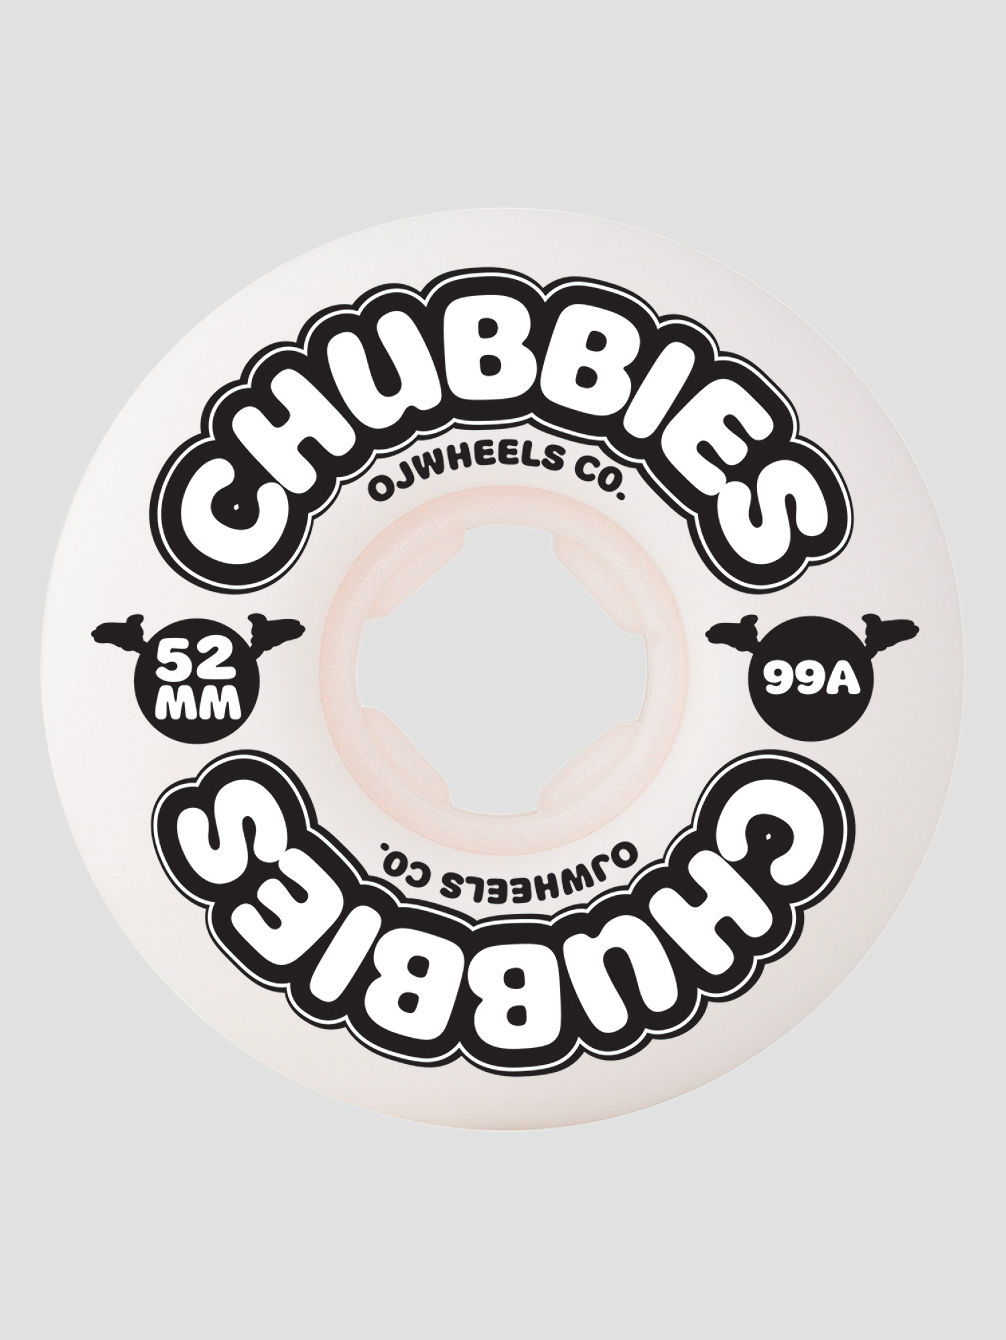 Chubbies 99A 52mm Roues